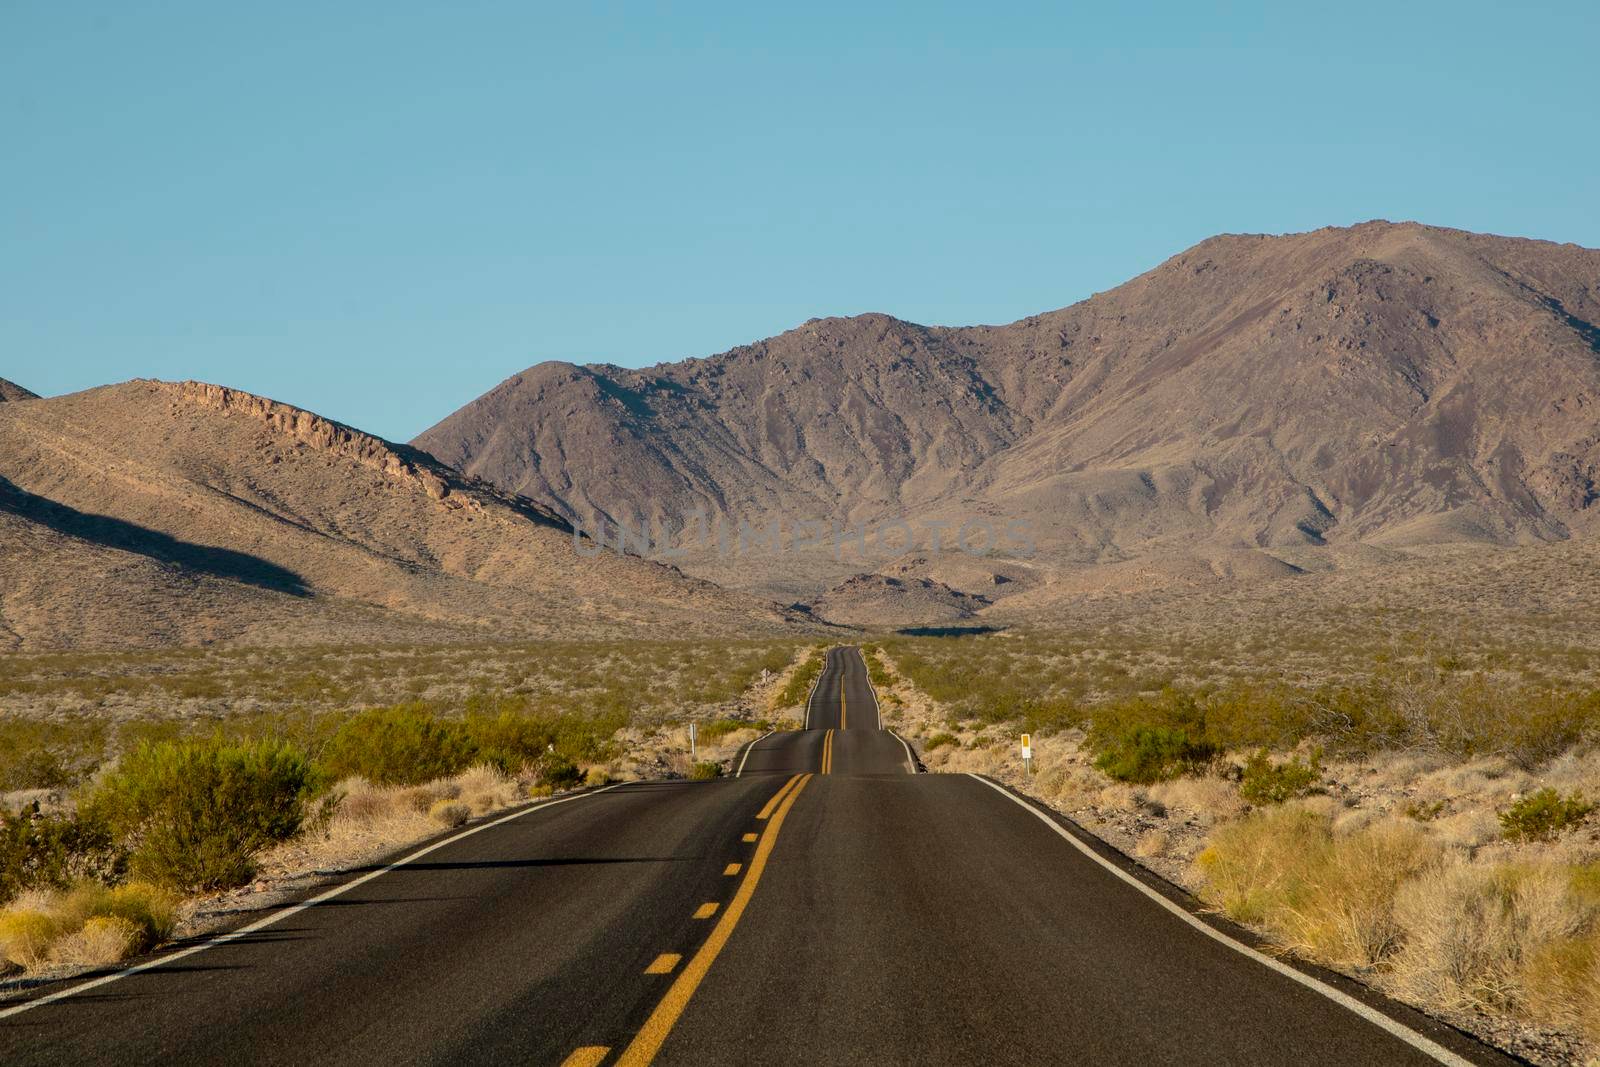 Wavy road and some mountains in the background in Death Valley in the USA